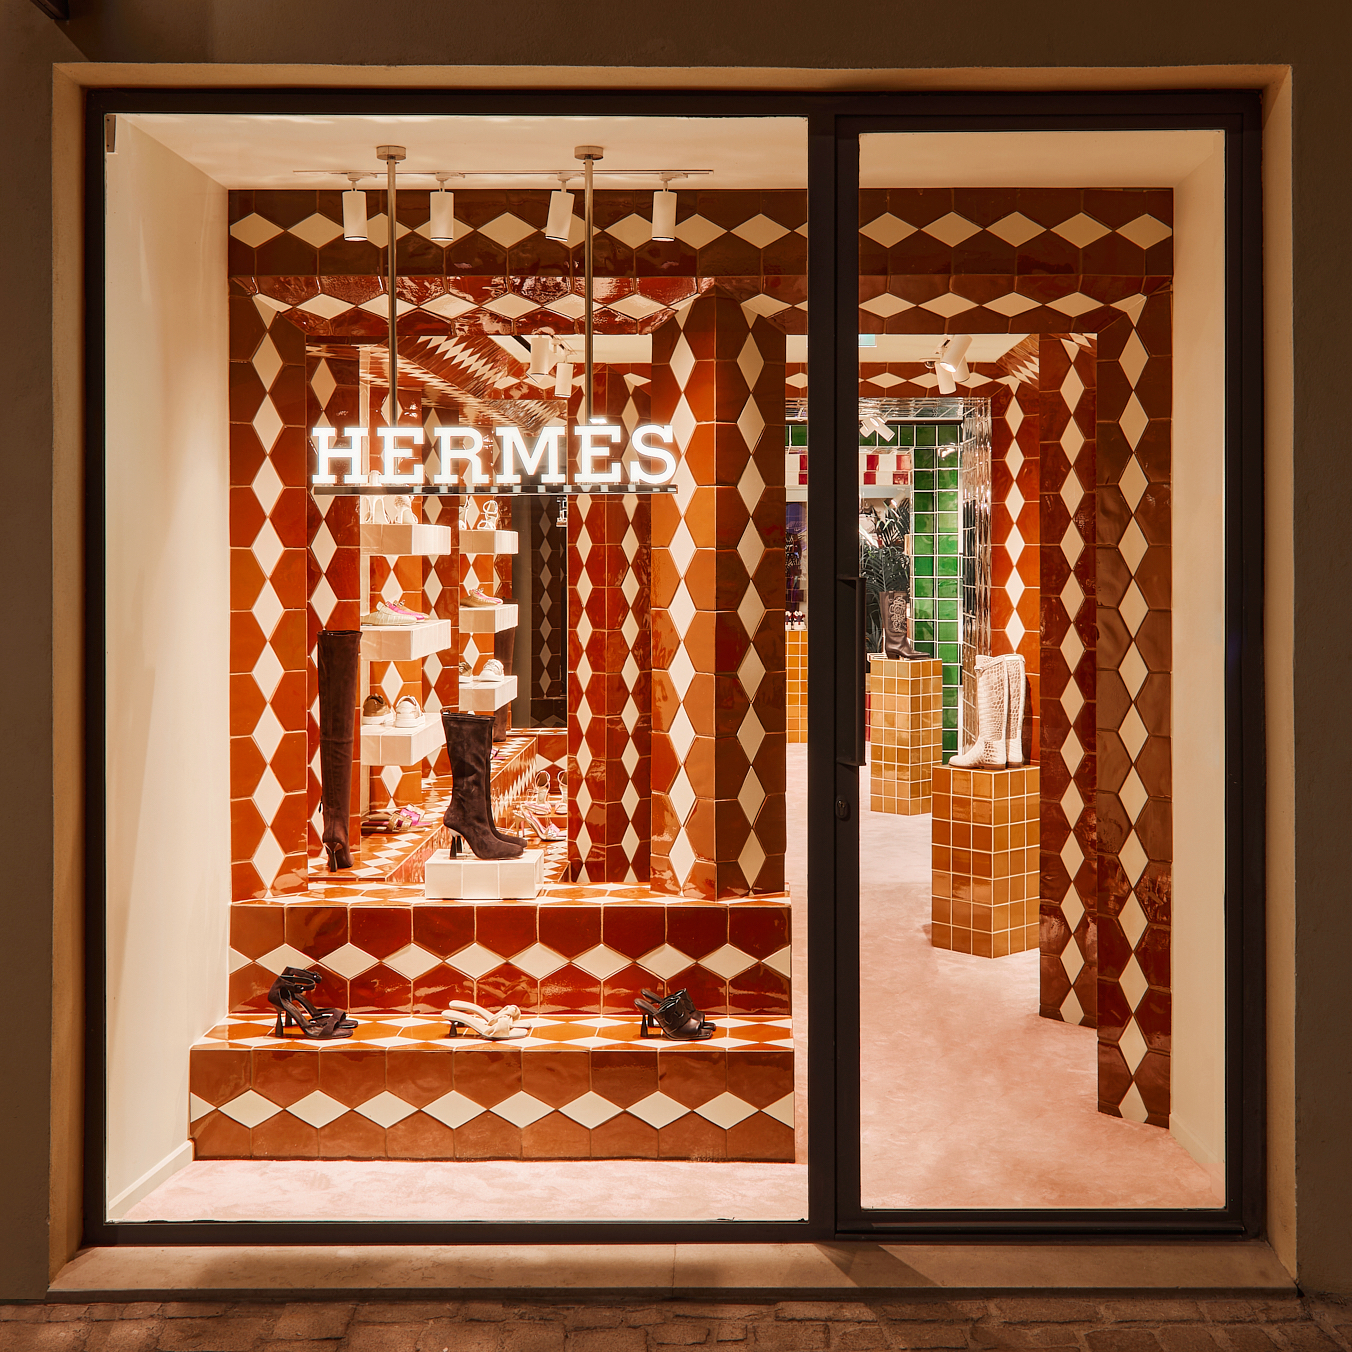 Picture of the Hermès project